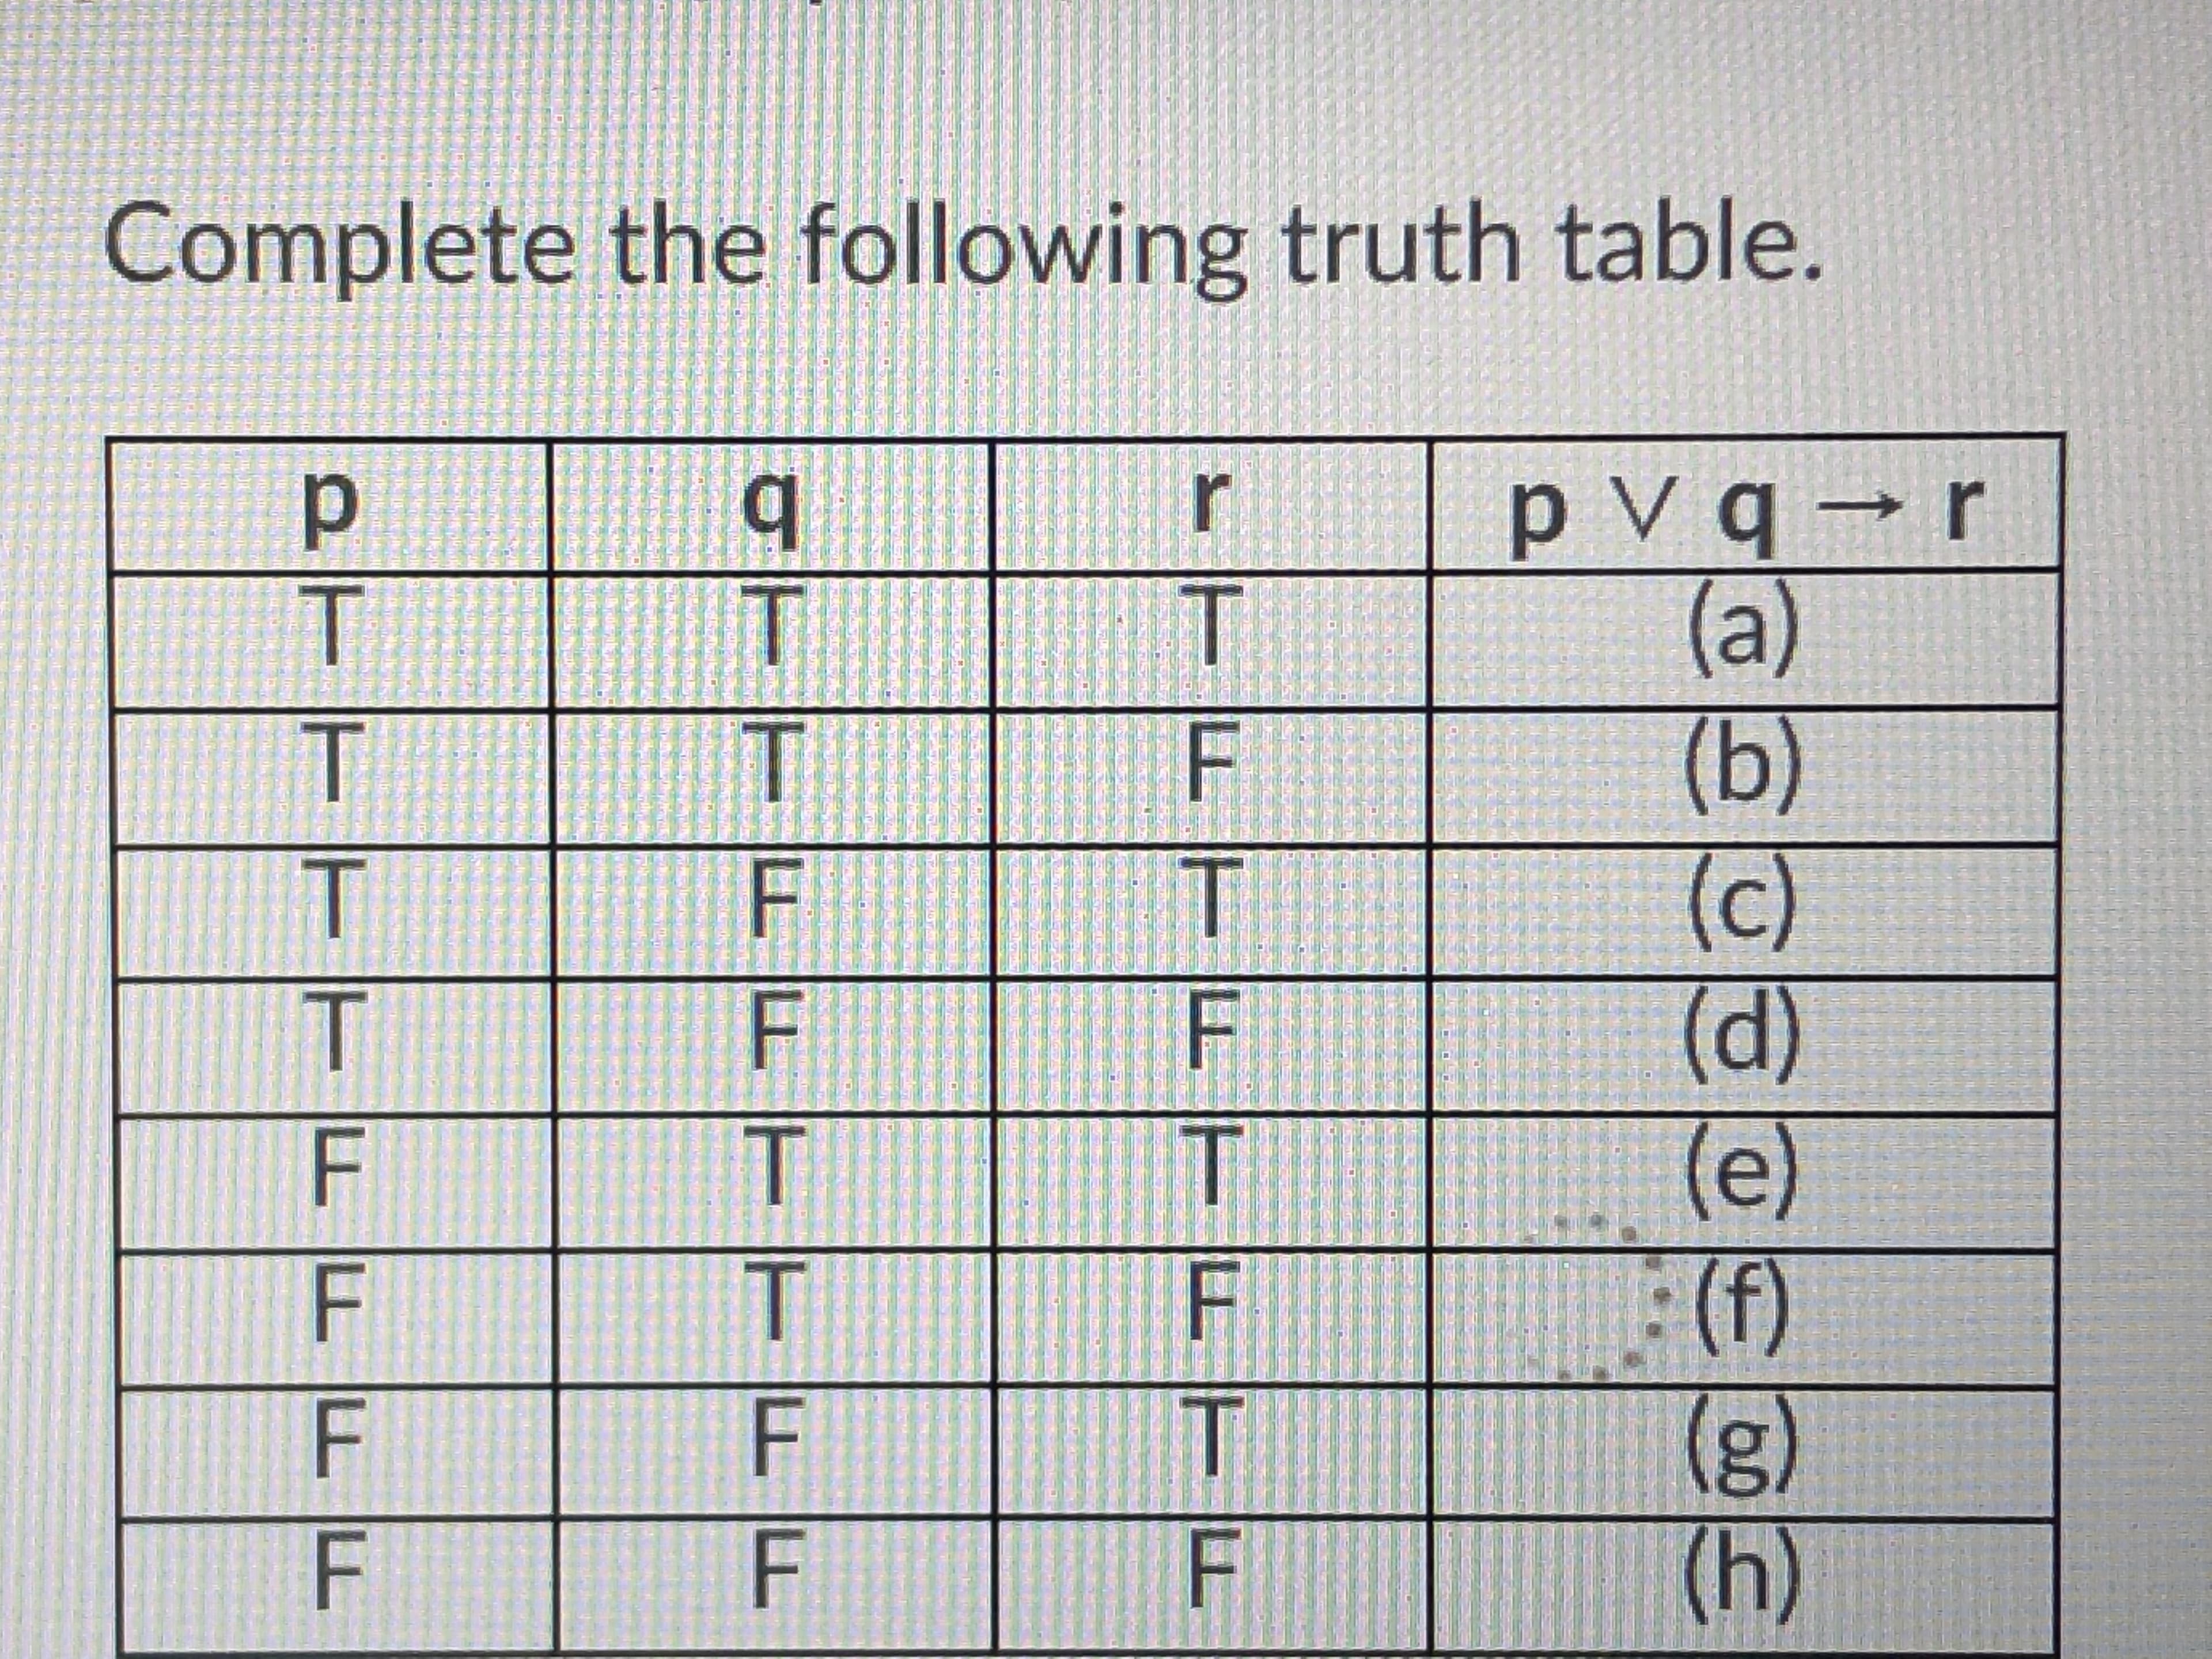 Complete the following truth table
ㄒㄧㄧ
--(g)
